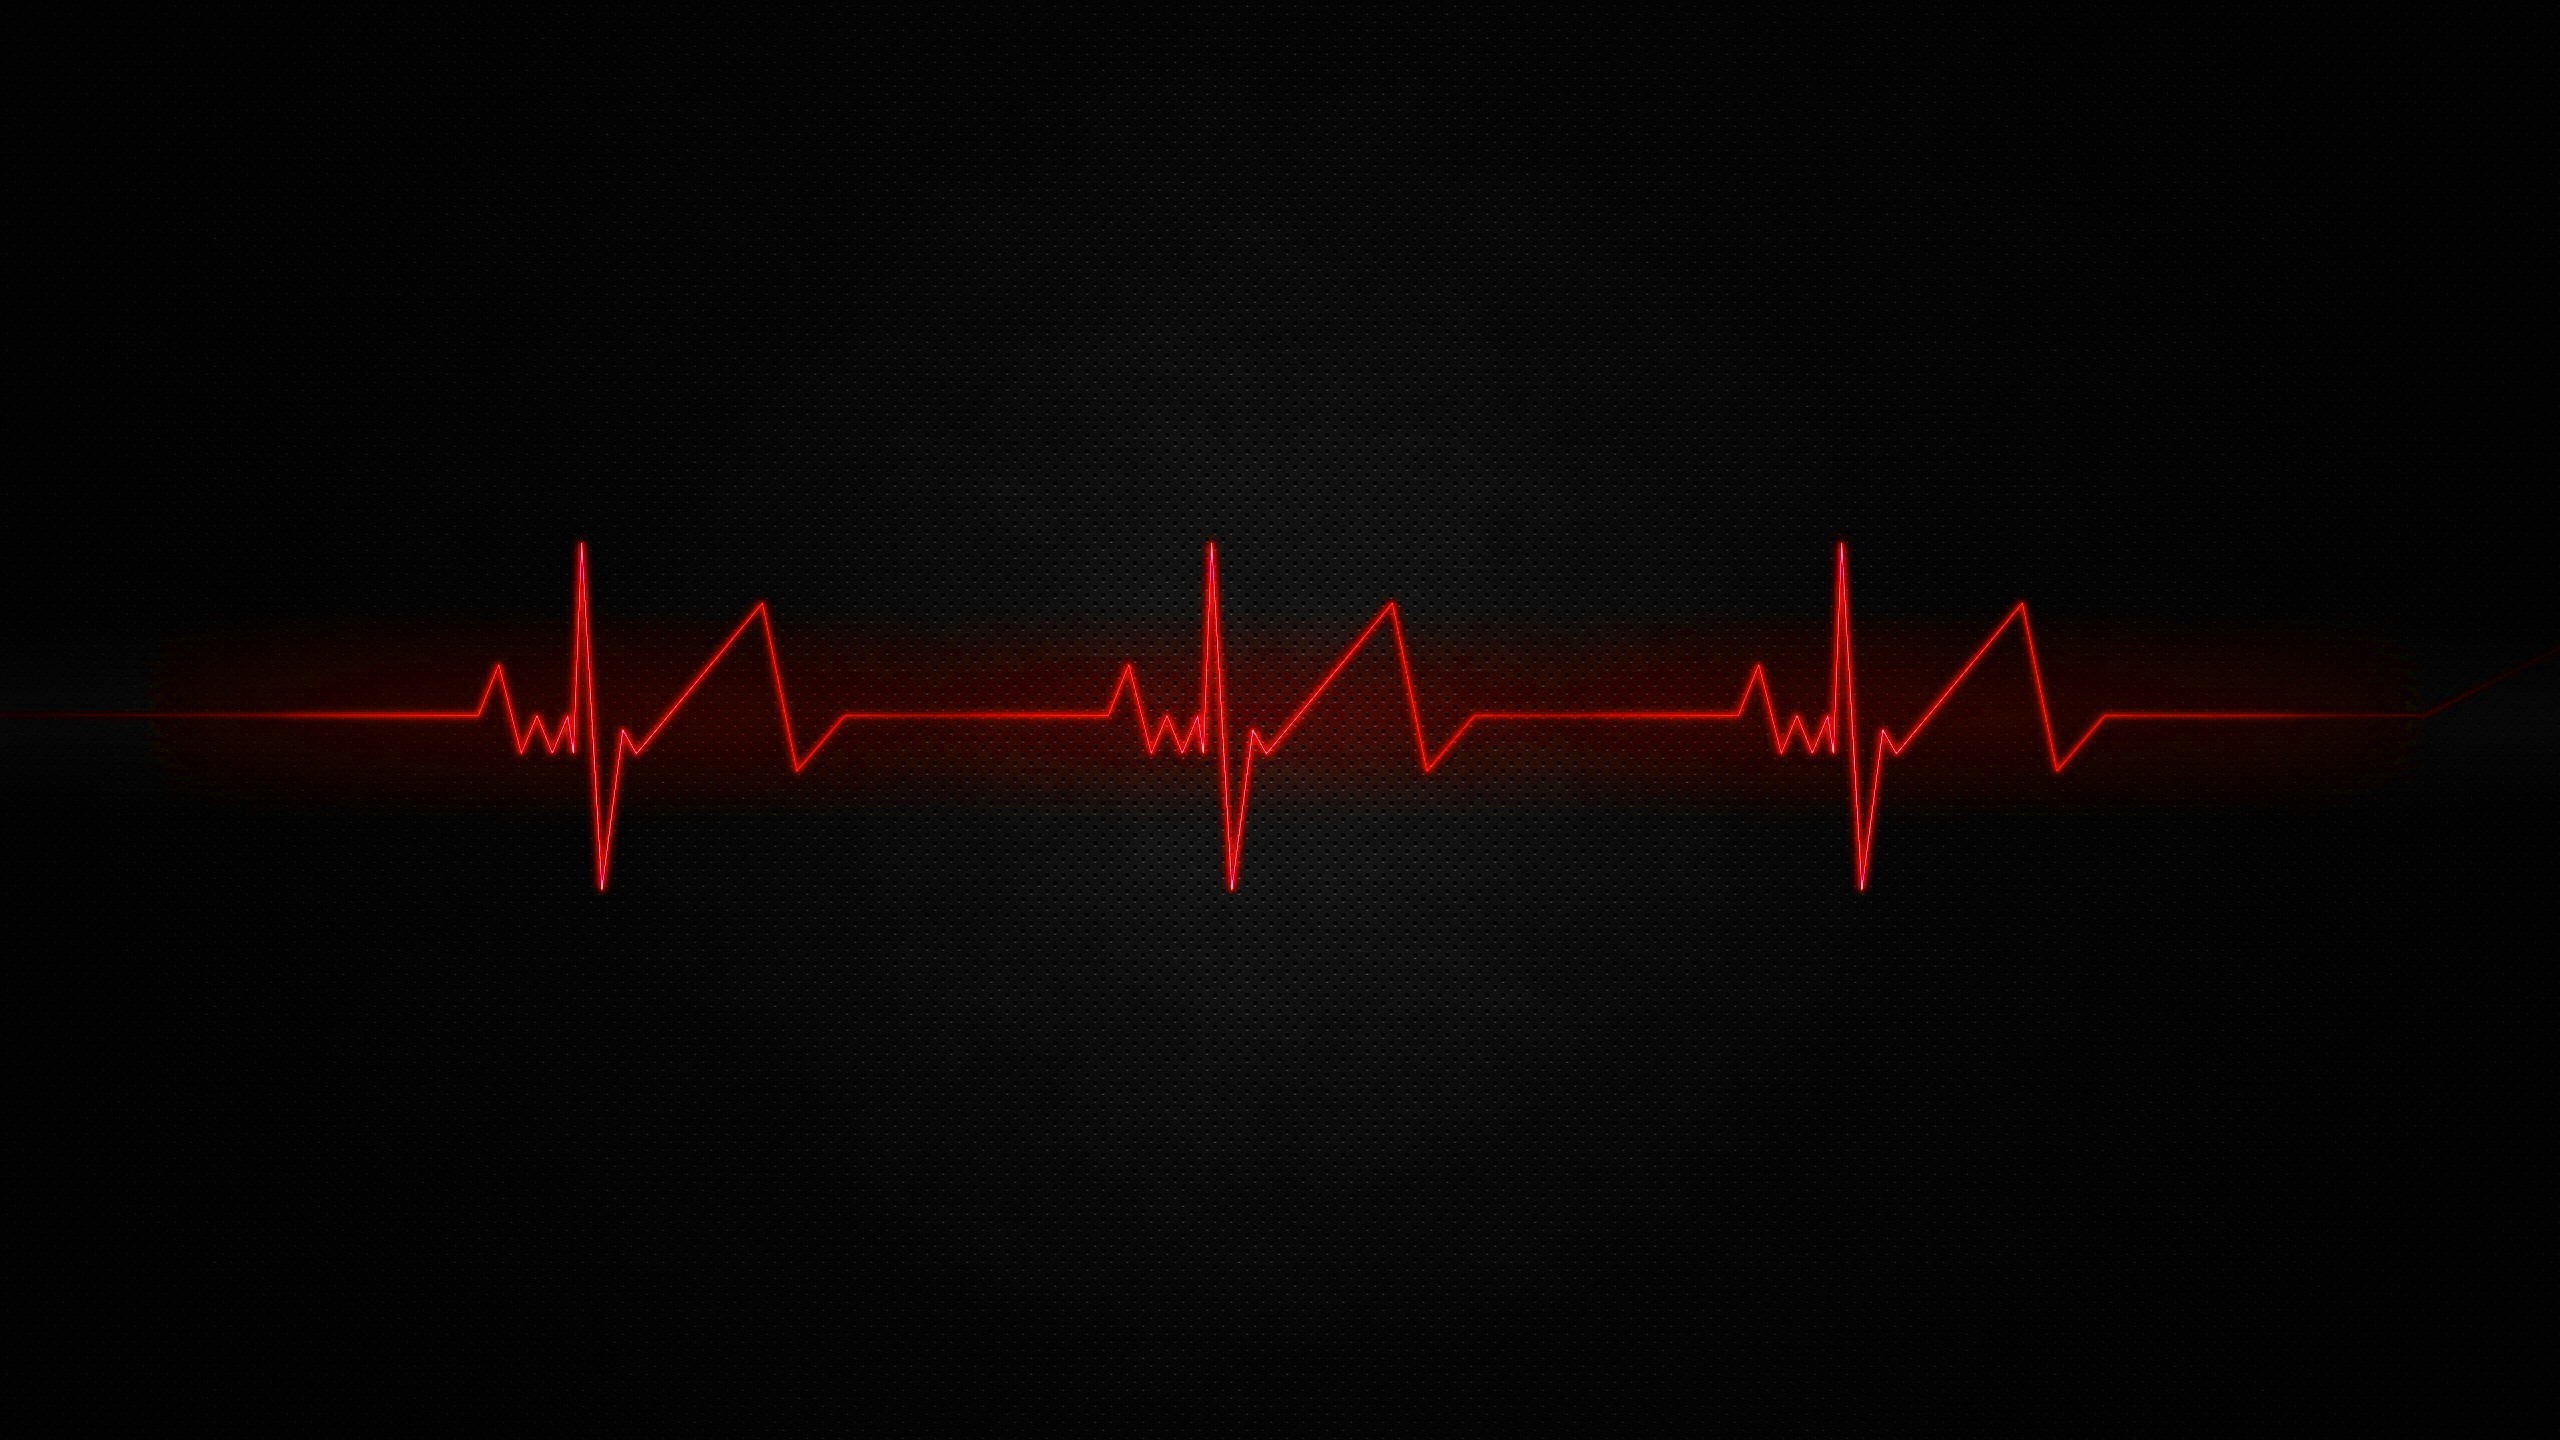 Backgrounds_Red_thread_heart_rate_on_a_black_background_104249_.jpg  (2560Ã1440) | pc wallpaper | Pinterest | Wallpaper